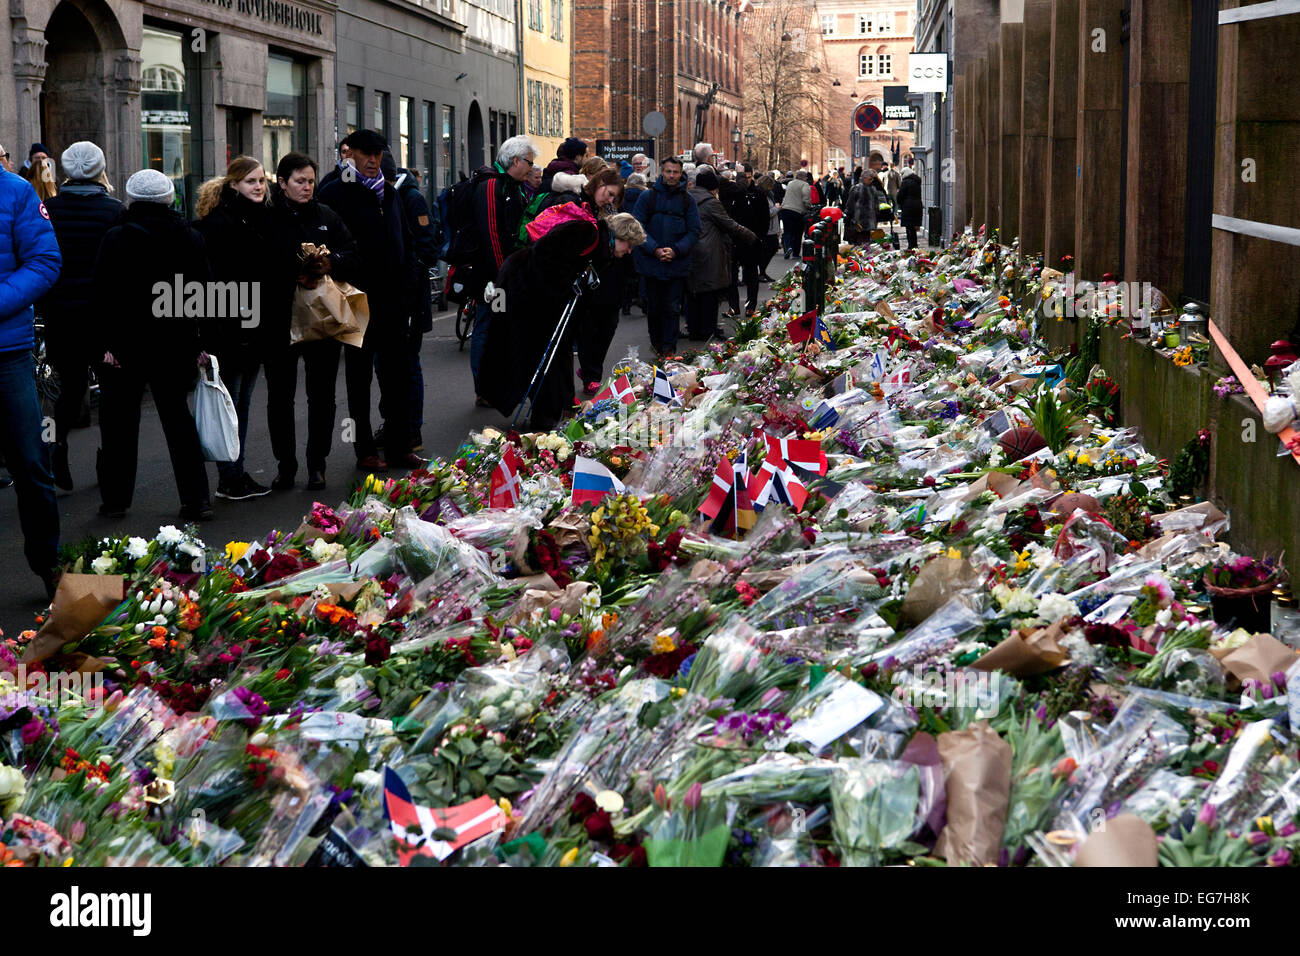 Copenhagen, Denmark, 18 February, 2015: The bed of flower bouquets is growing in front of Copenhagen synagogue.  So is the critics against police: They did not return fire on the perpetrator; Prison Service warned Secret Service against his Islamic Radicalization – he was realized from custody just 2 weeks before his terror attacks;  police did not make correct risk assessments at Krudtonden – the first crime scene – as there was no police outside the venue, so the perpetrator could freely shoot through the windows. So says sources to Danish news media, TV2NEWS Stock Photo